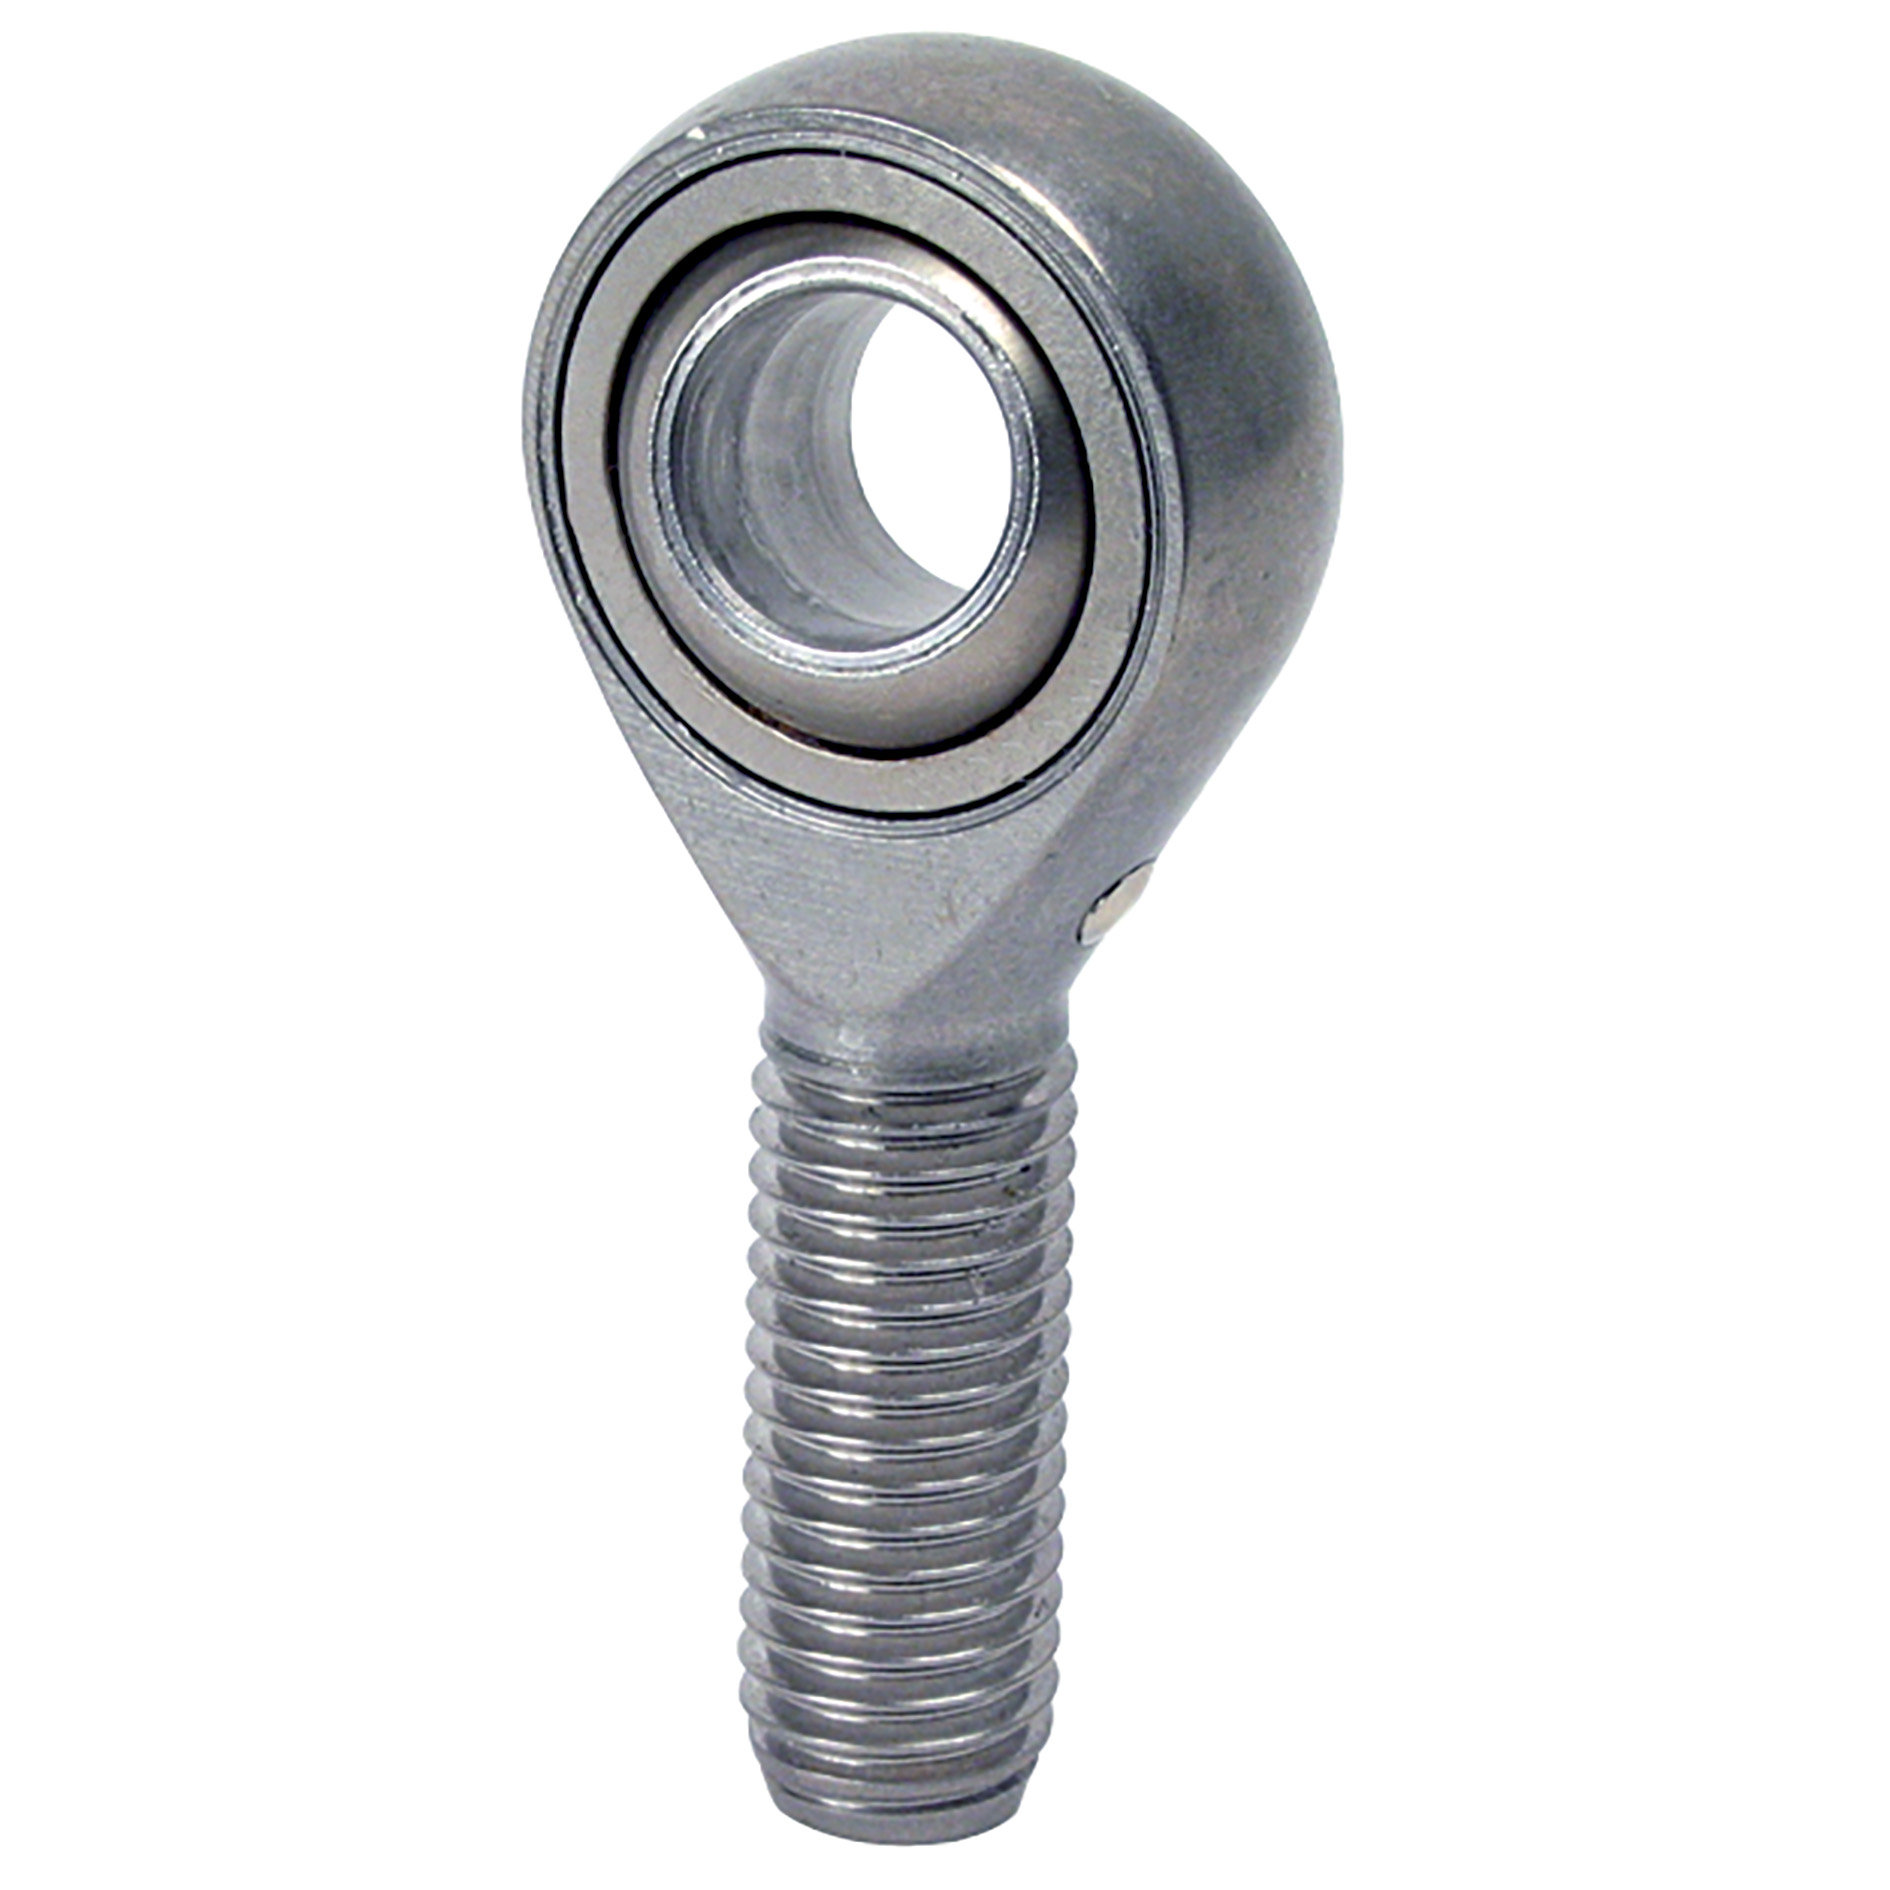 Male rod ends  - Stainless steel / PTFE - right hand - Male